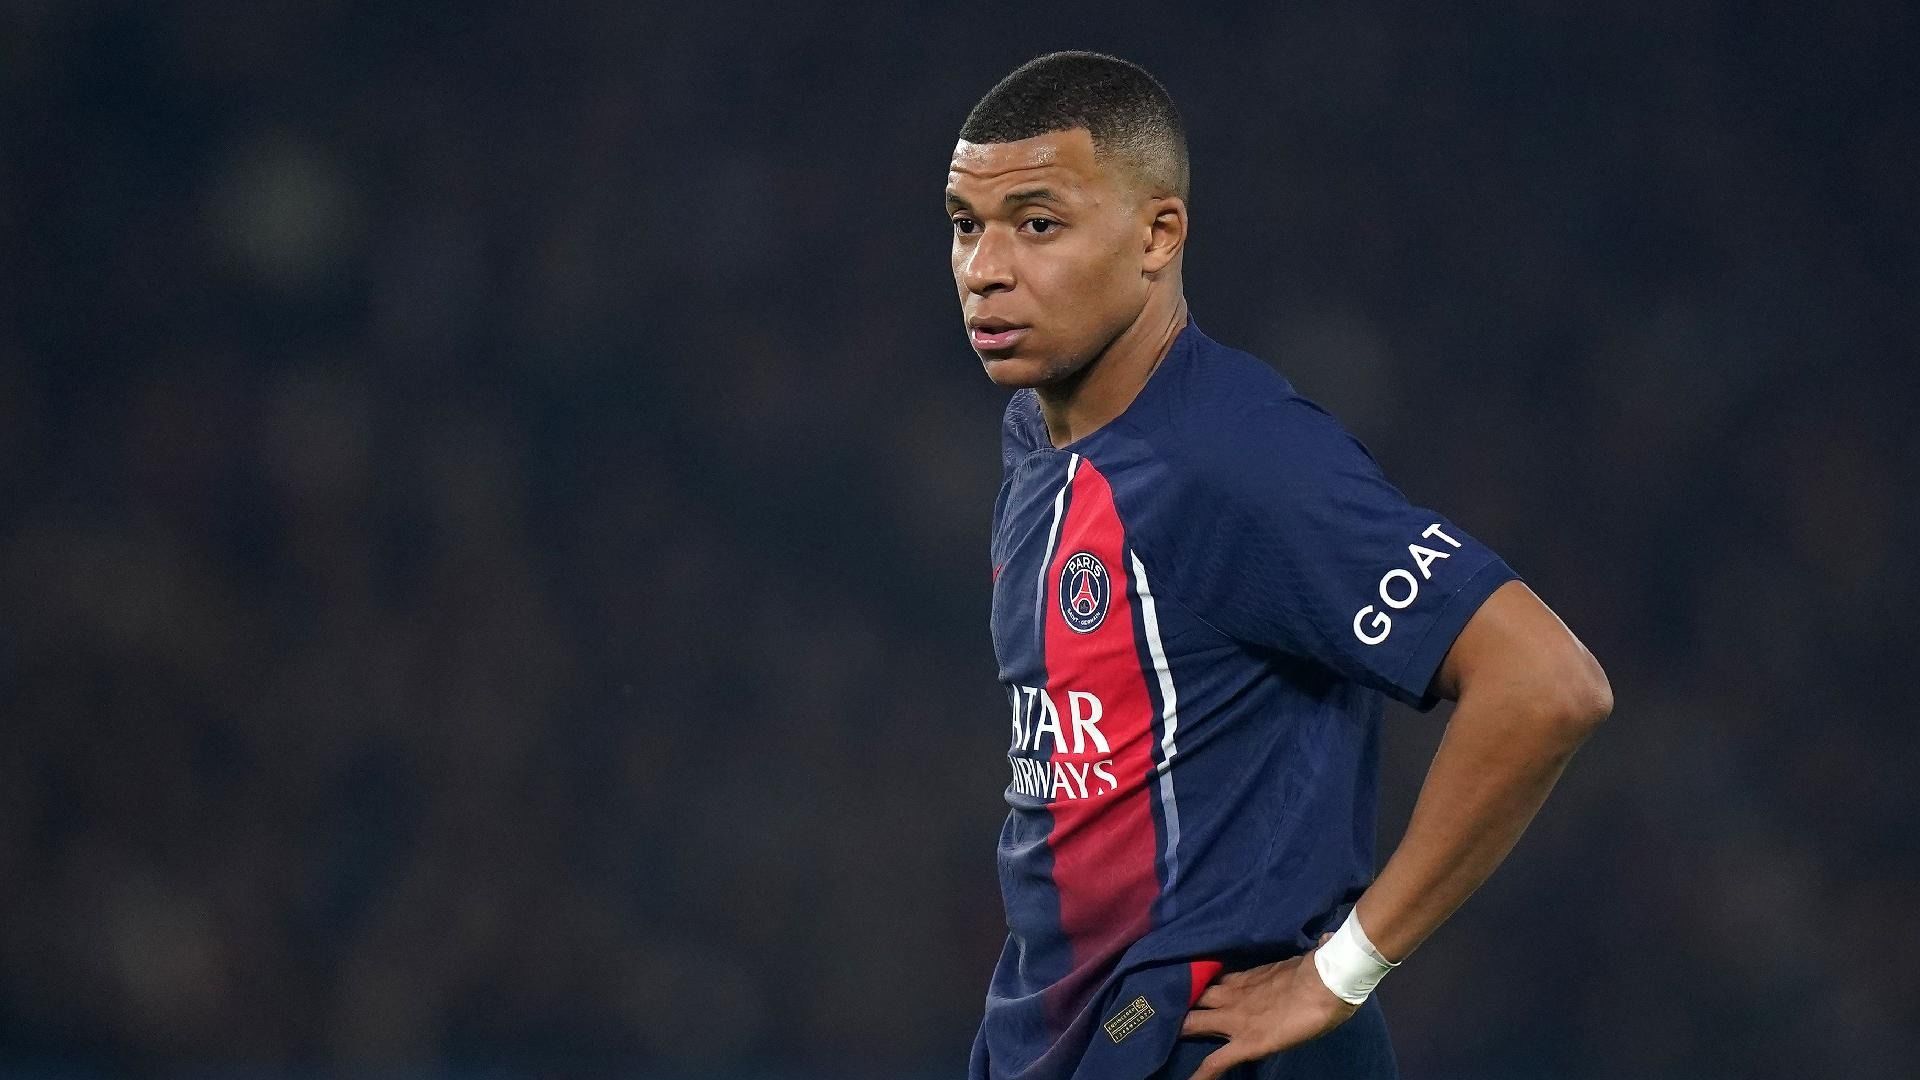 Mbappe Is Unhappy With Real Madrid's Financial Conditions